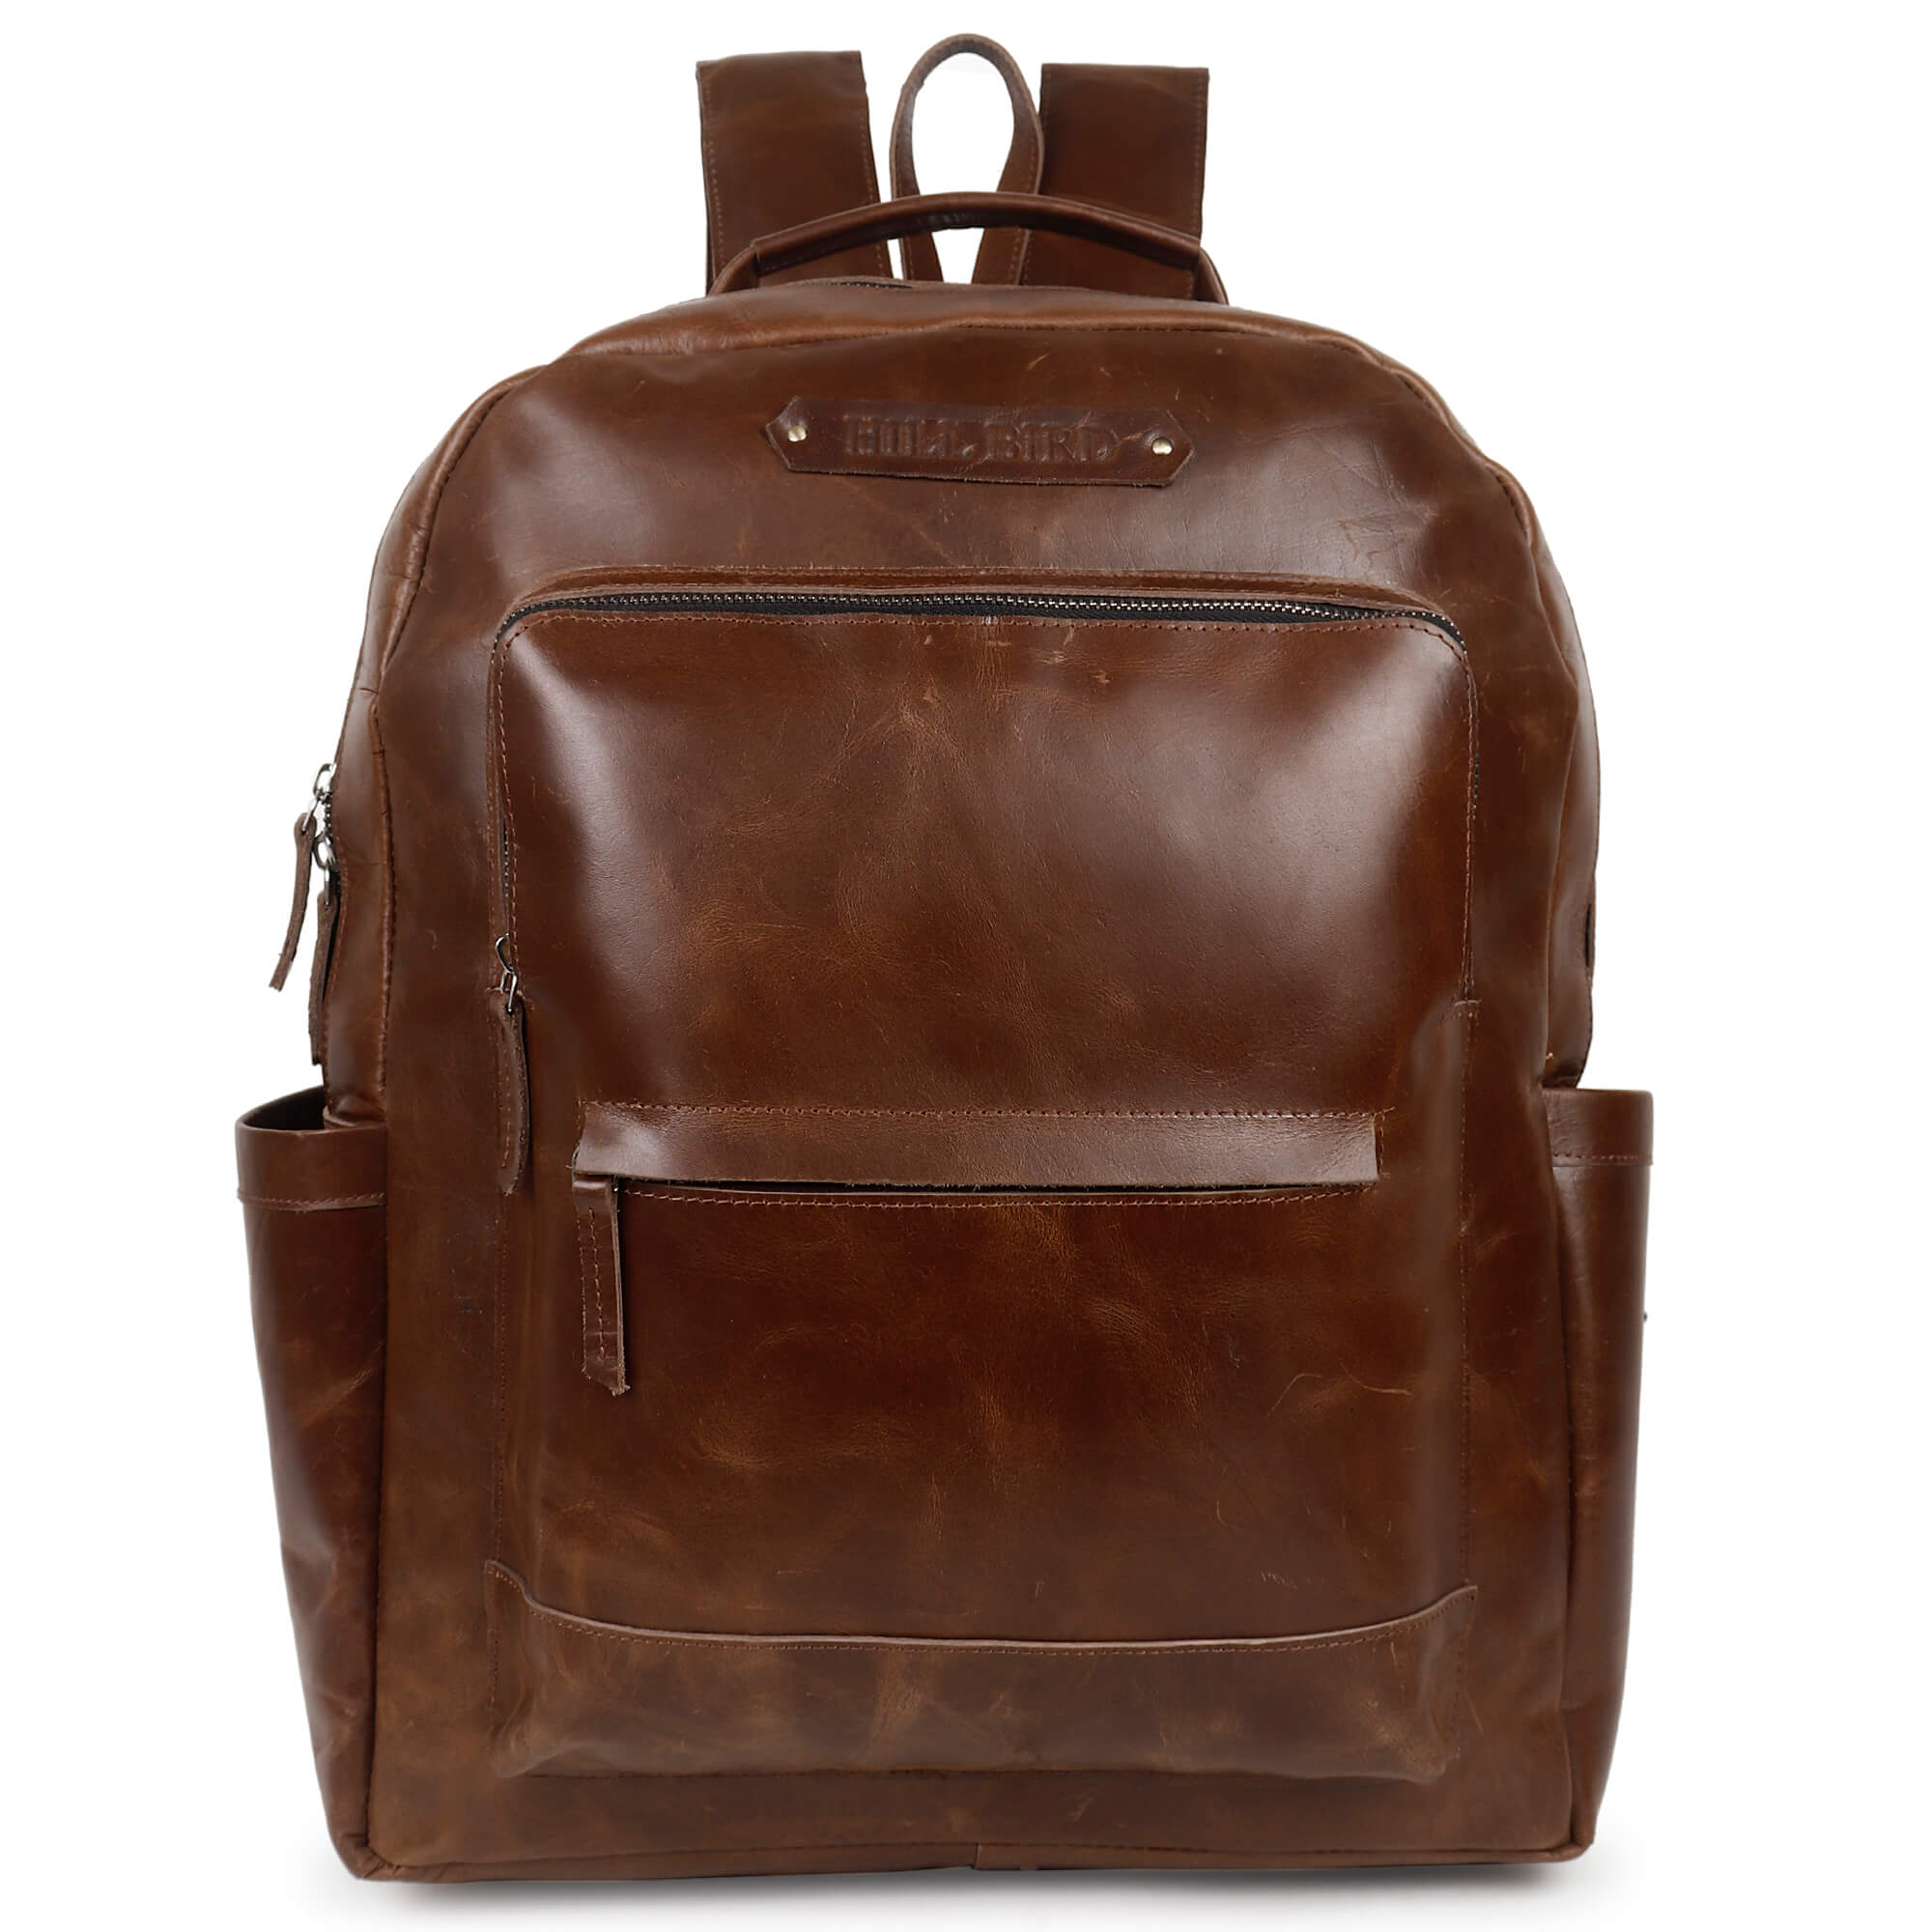 HILL BIRD Snova Brown Leather Backpack